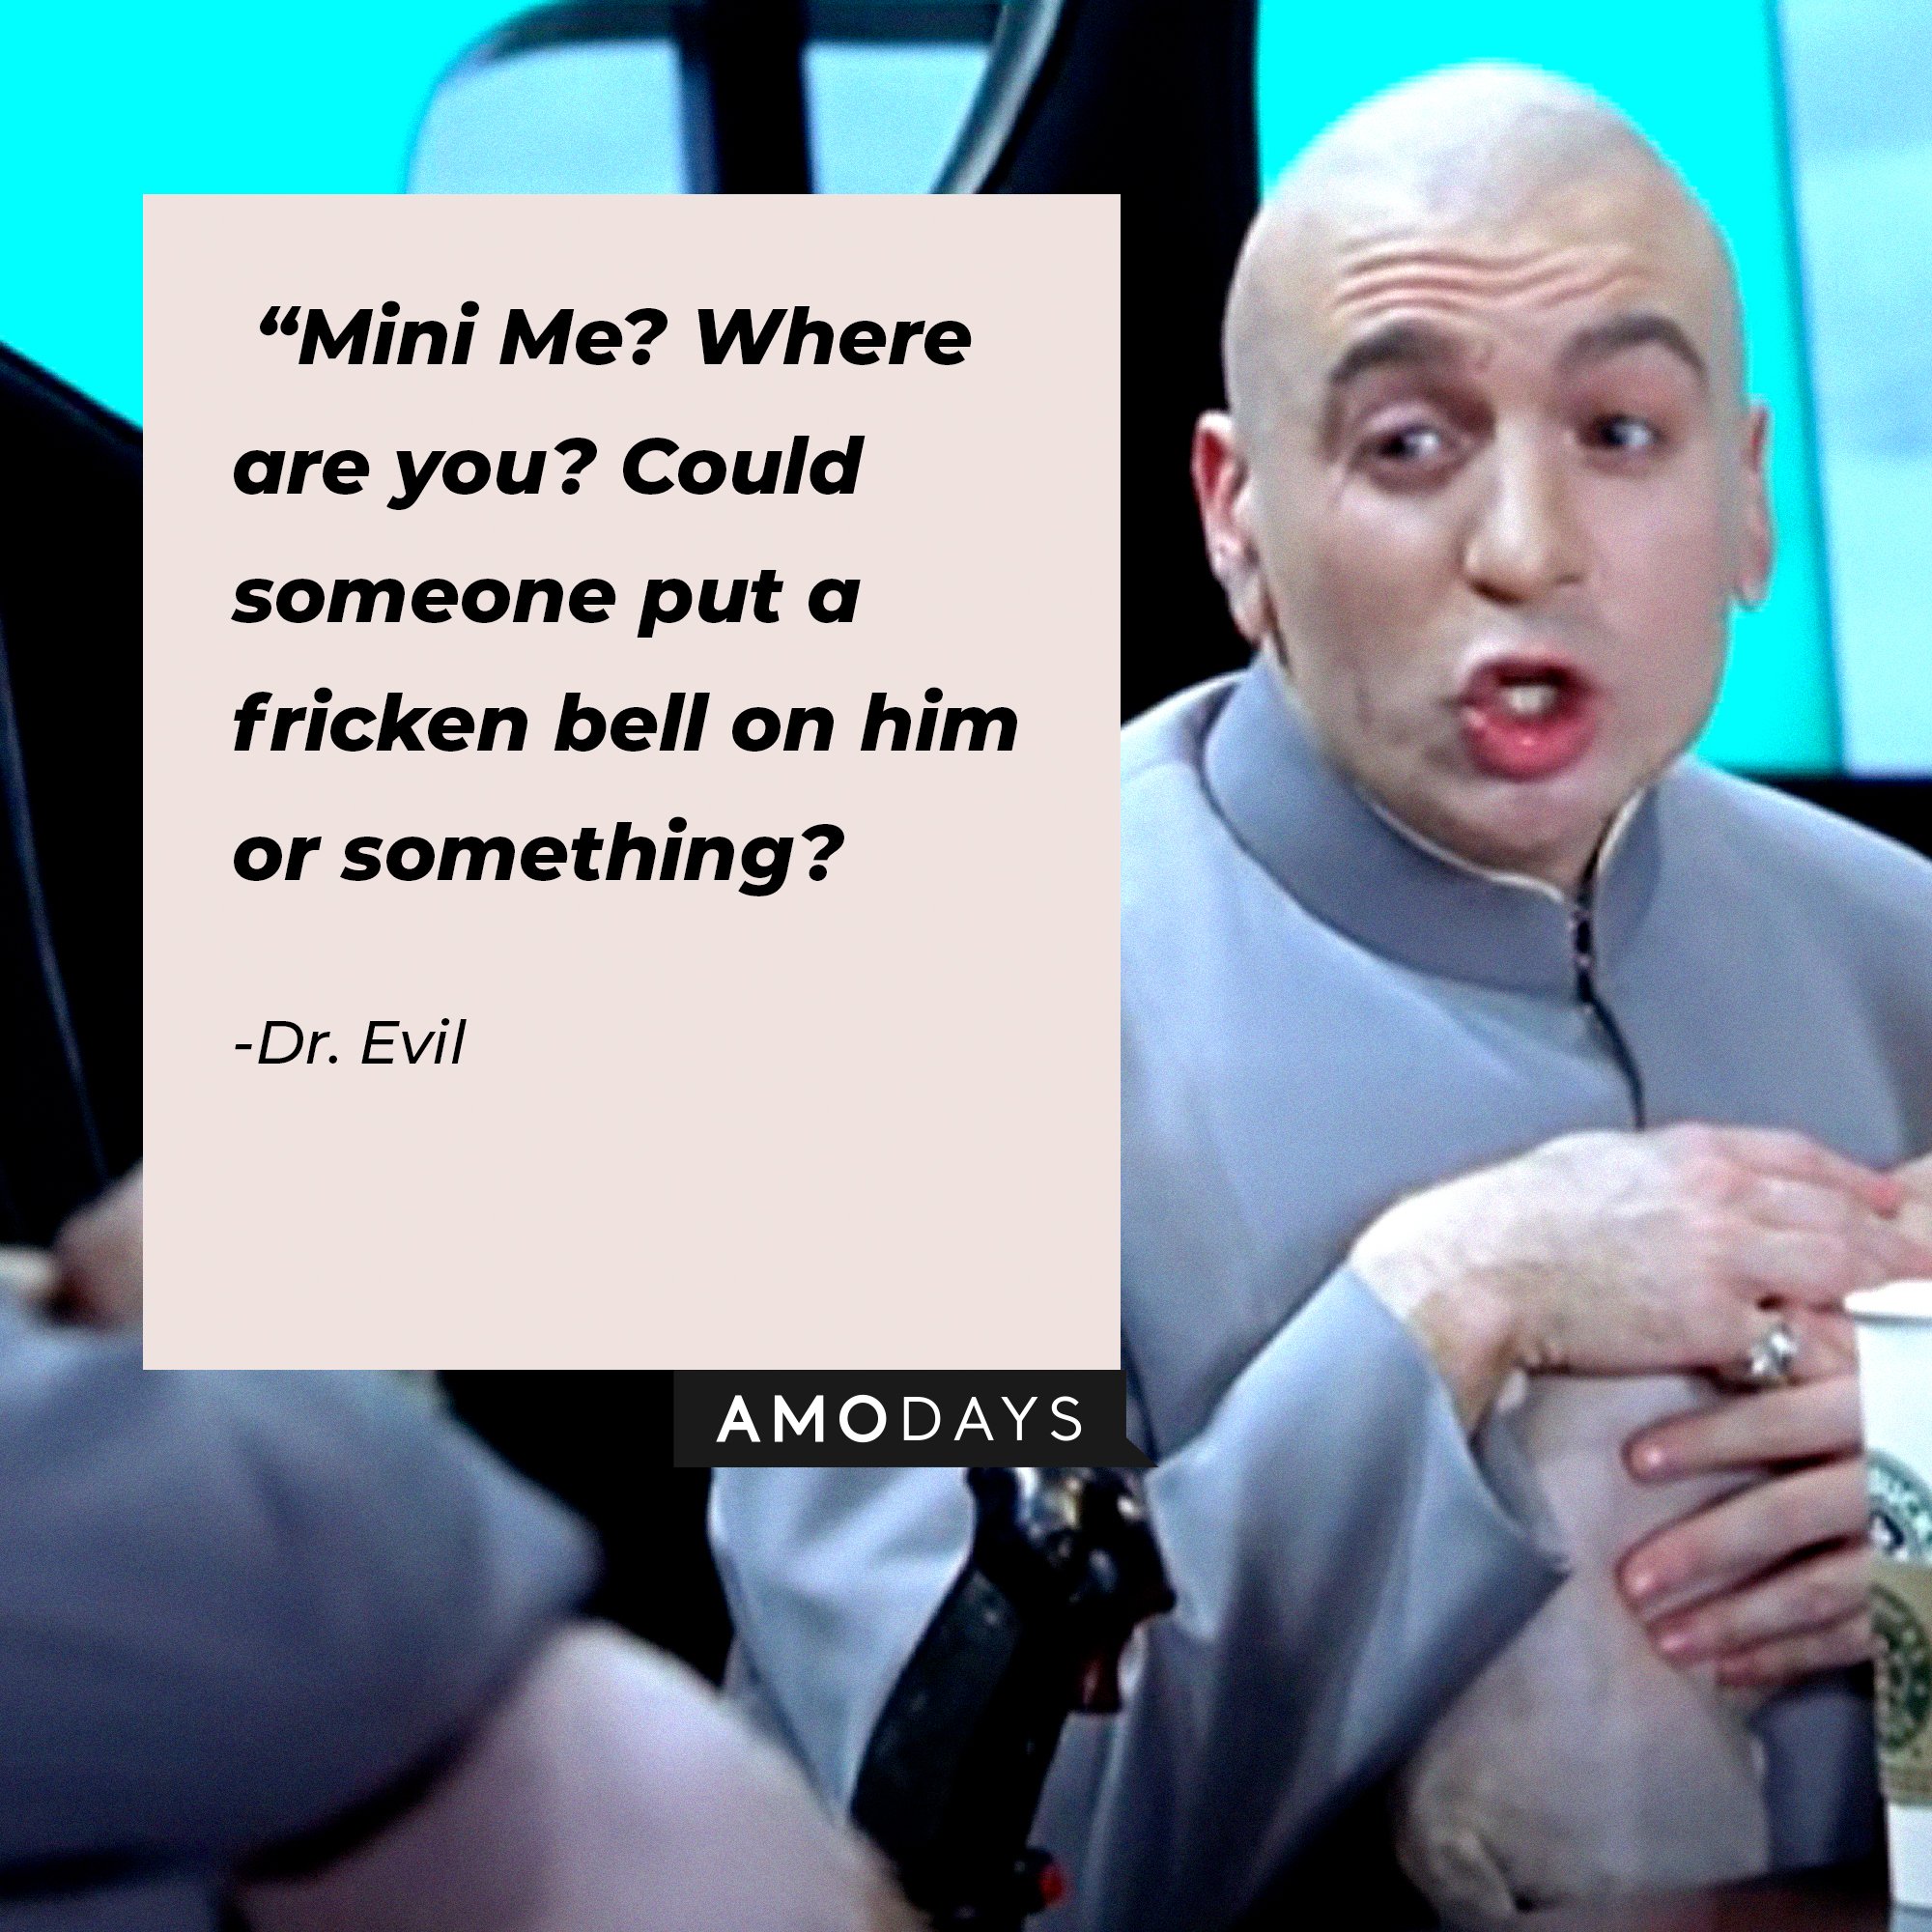  Dr. Evil’s quote: "Mini-Me? Where are you? Could someone put a fricken bell on him or something?"| Image: Amodays